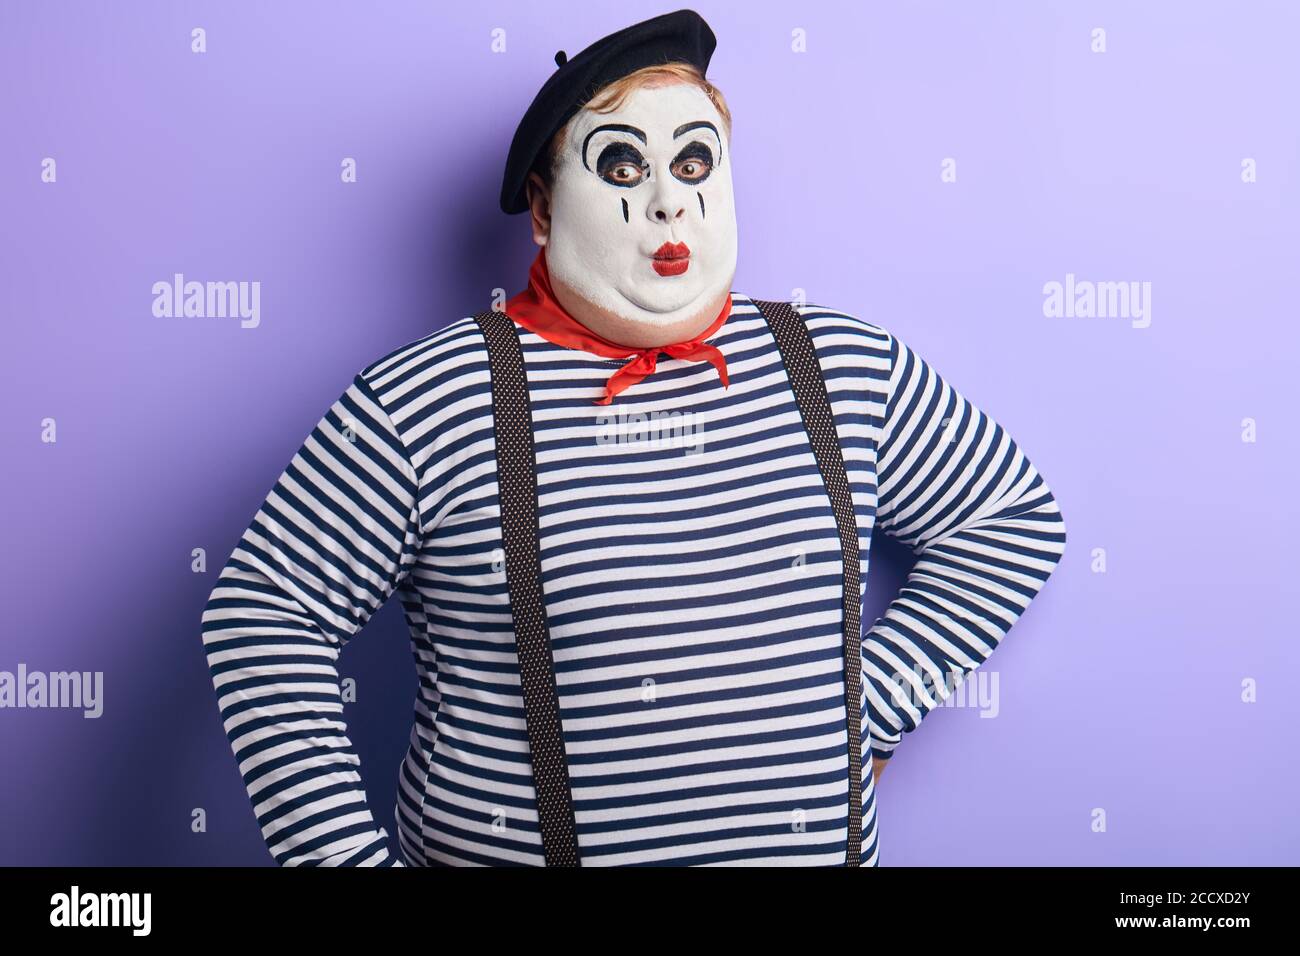 awesome man with painted face amusing audience. close up photo. isolated blue backround, studio shot. Stock Photo